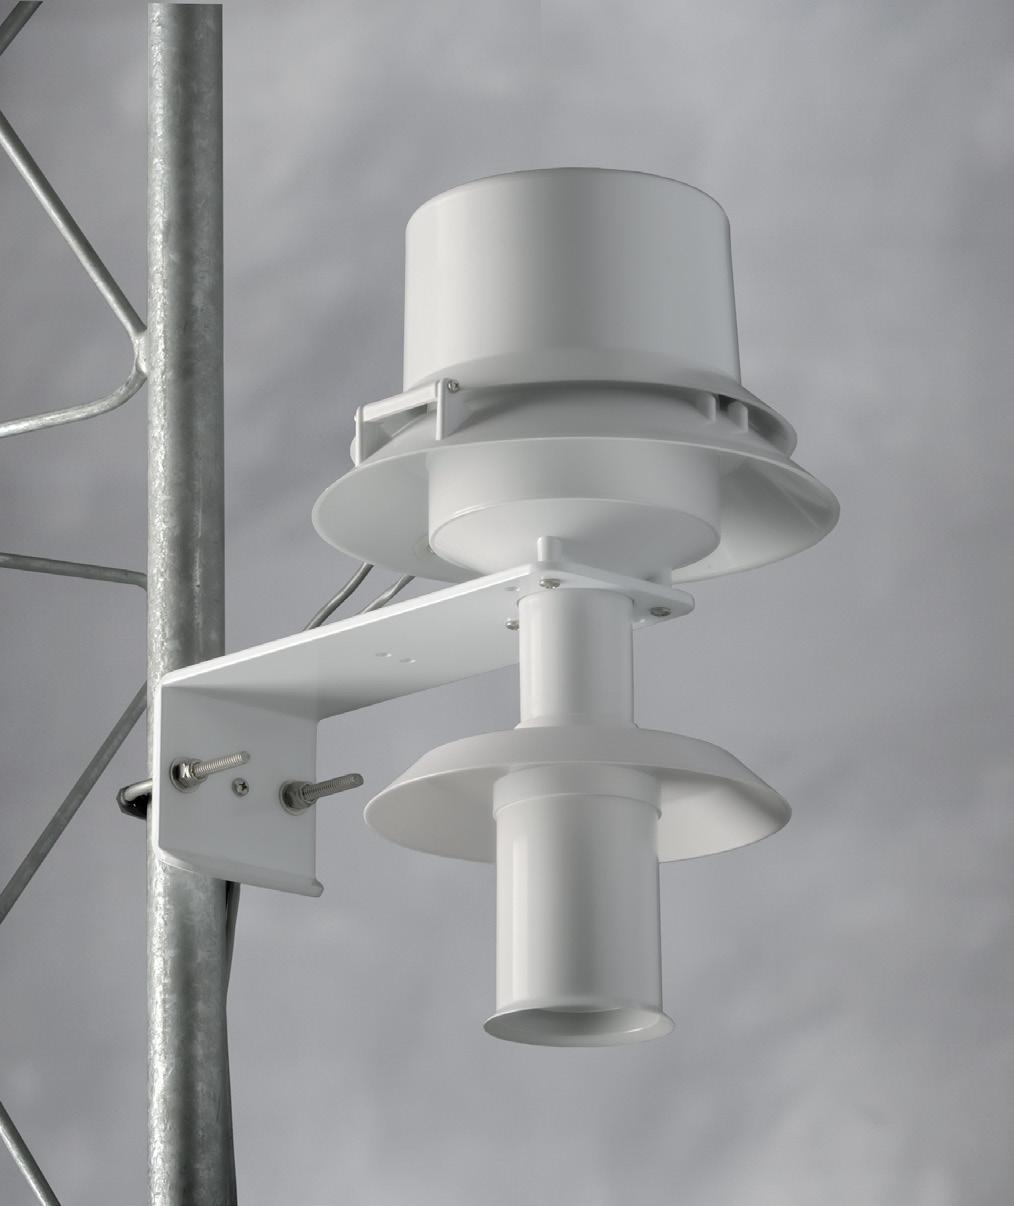 The triple wall shield employs three concentric downward facing intake tubes and a canopy shade to isolate the temperature sensor from direct and indirect radiation.